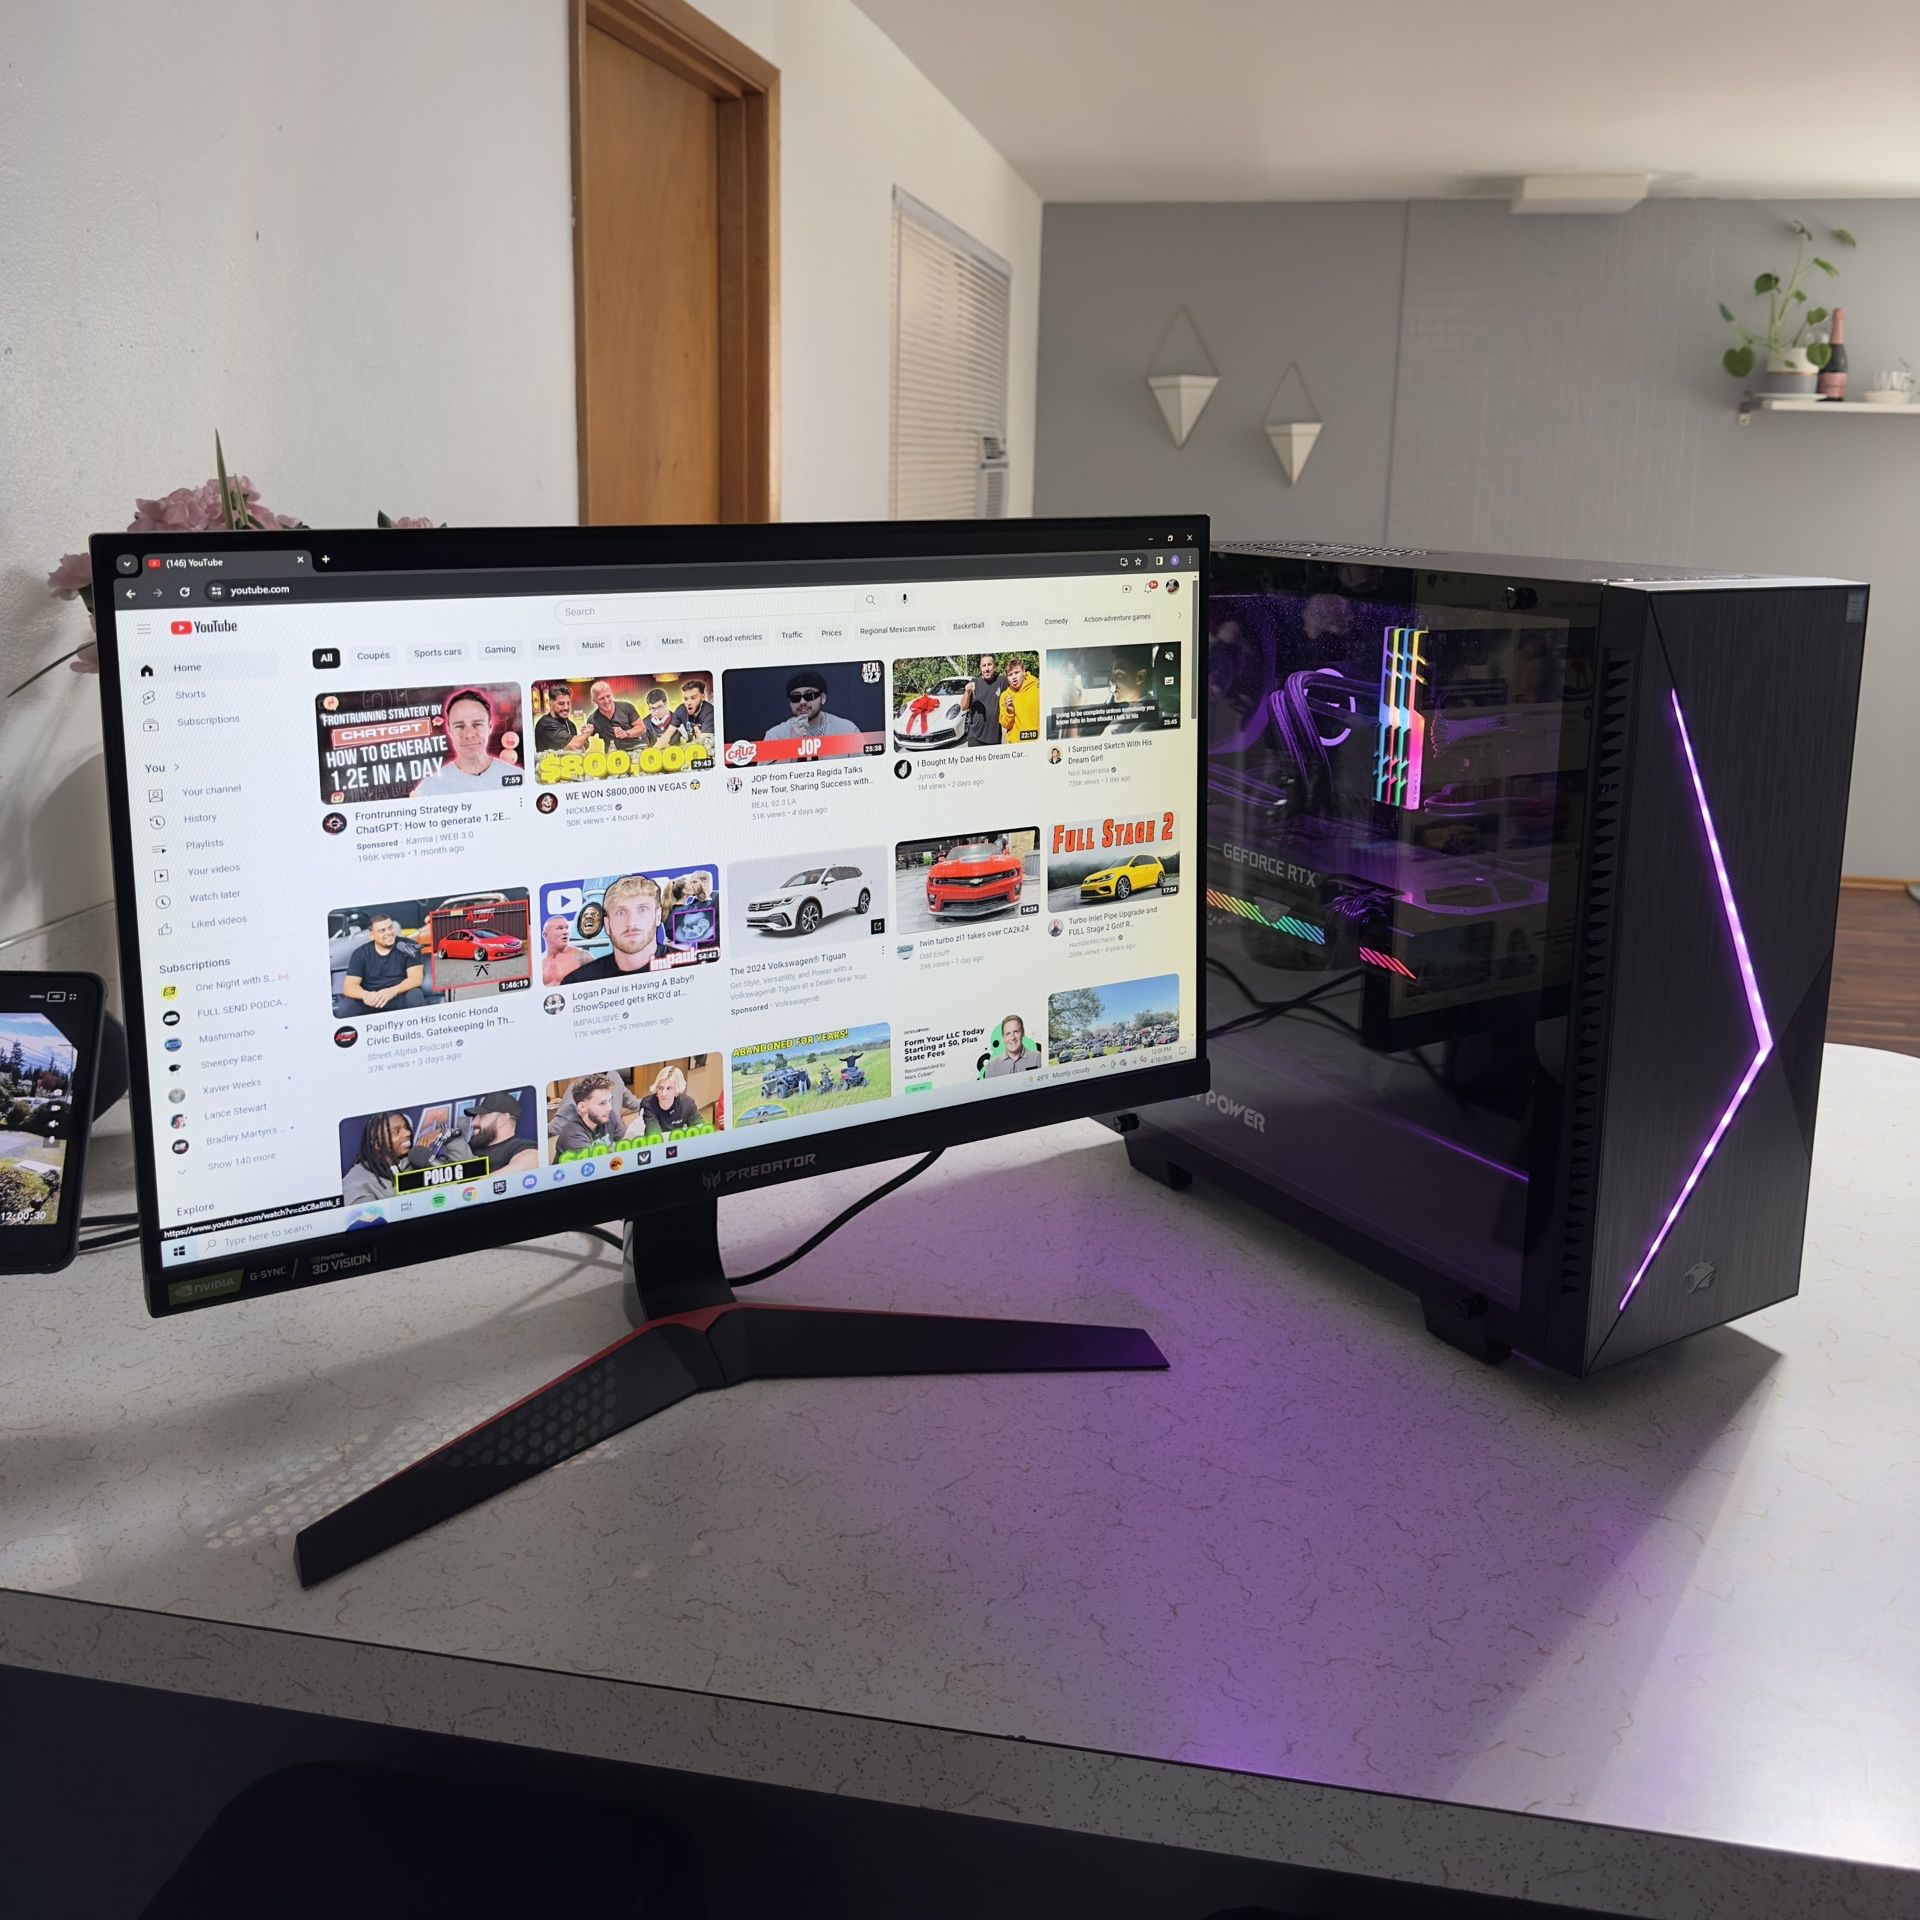 Gaming PC & Monitor (High End) - READ BELOW